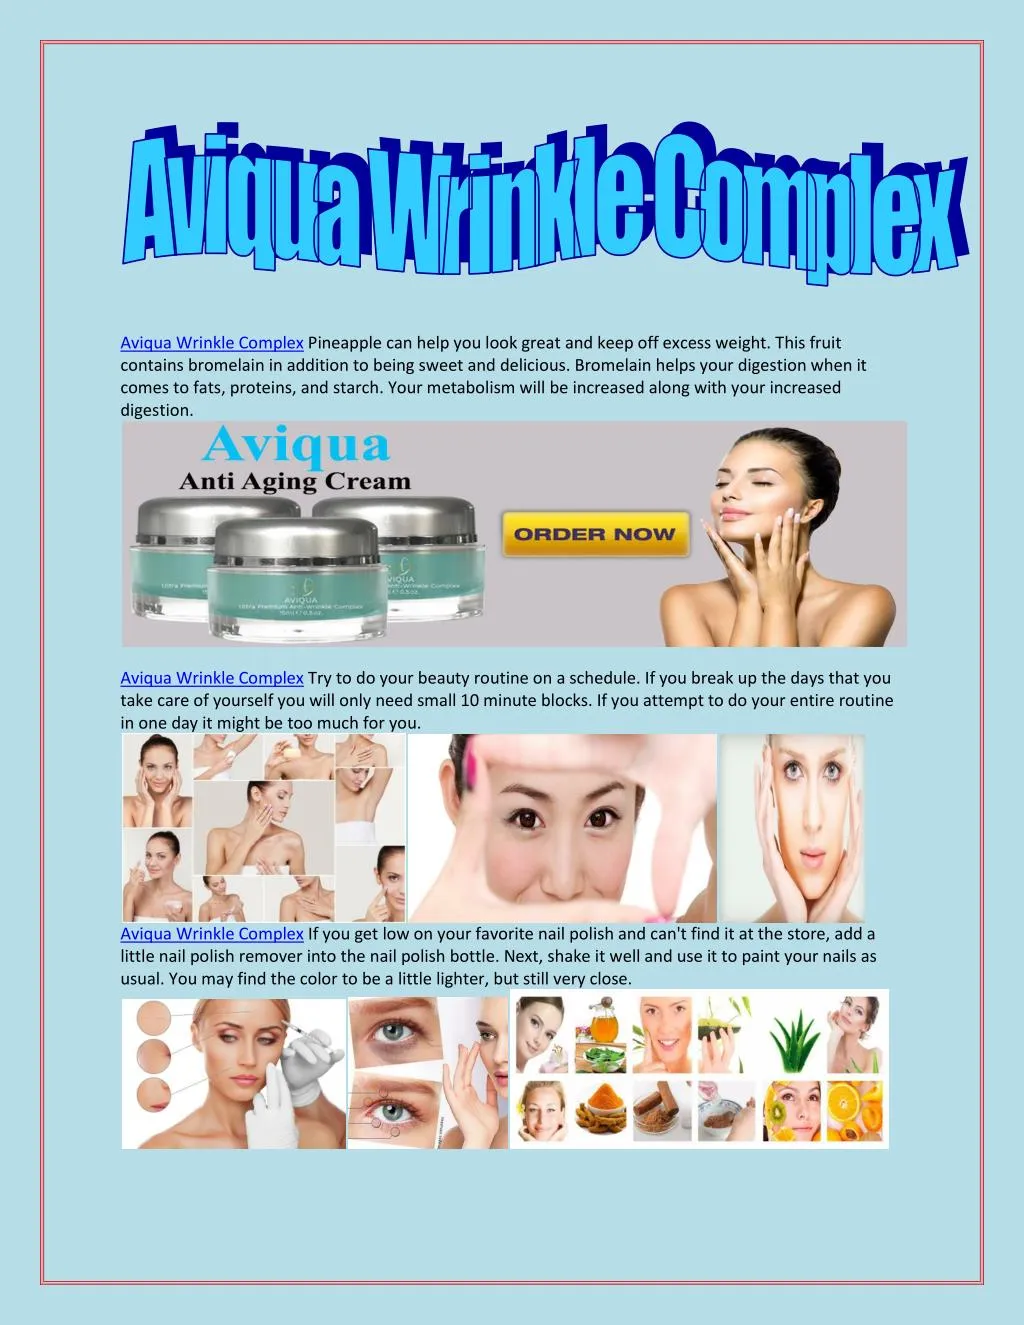 aviqua wrinkle complex pineapple can help